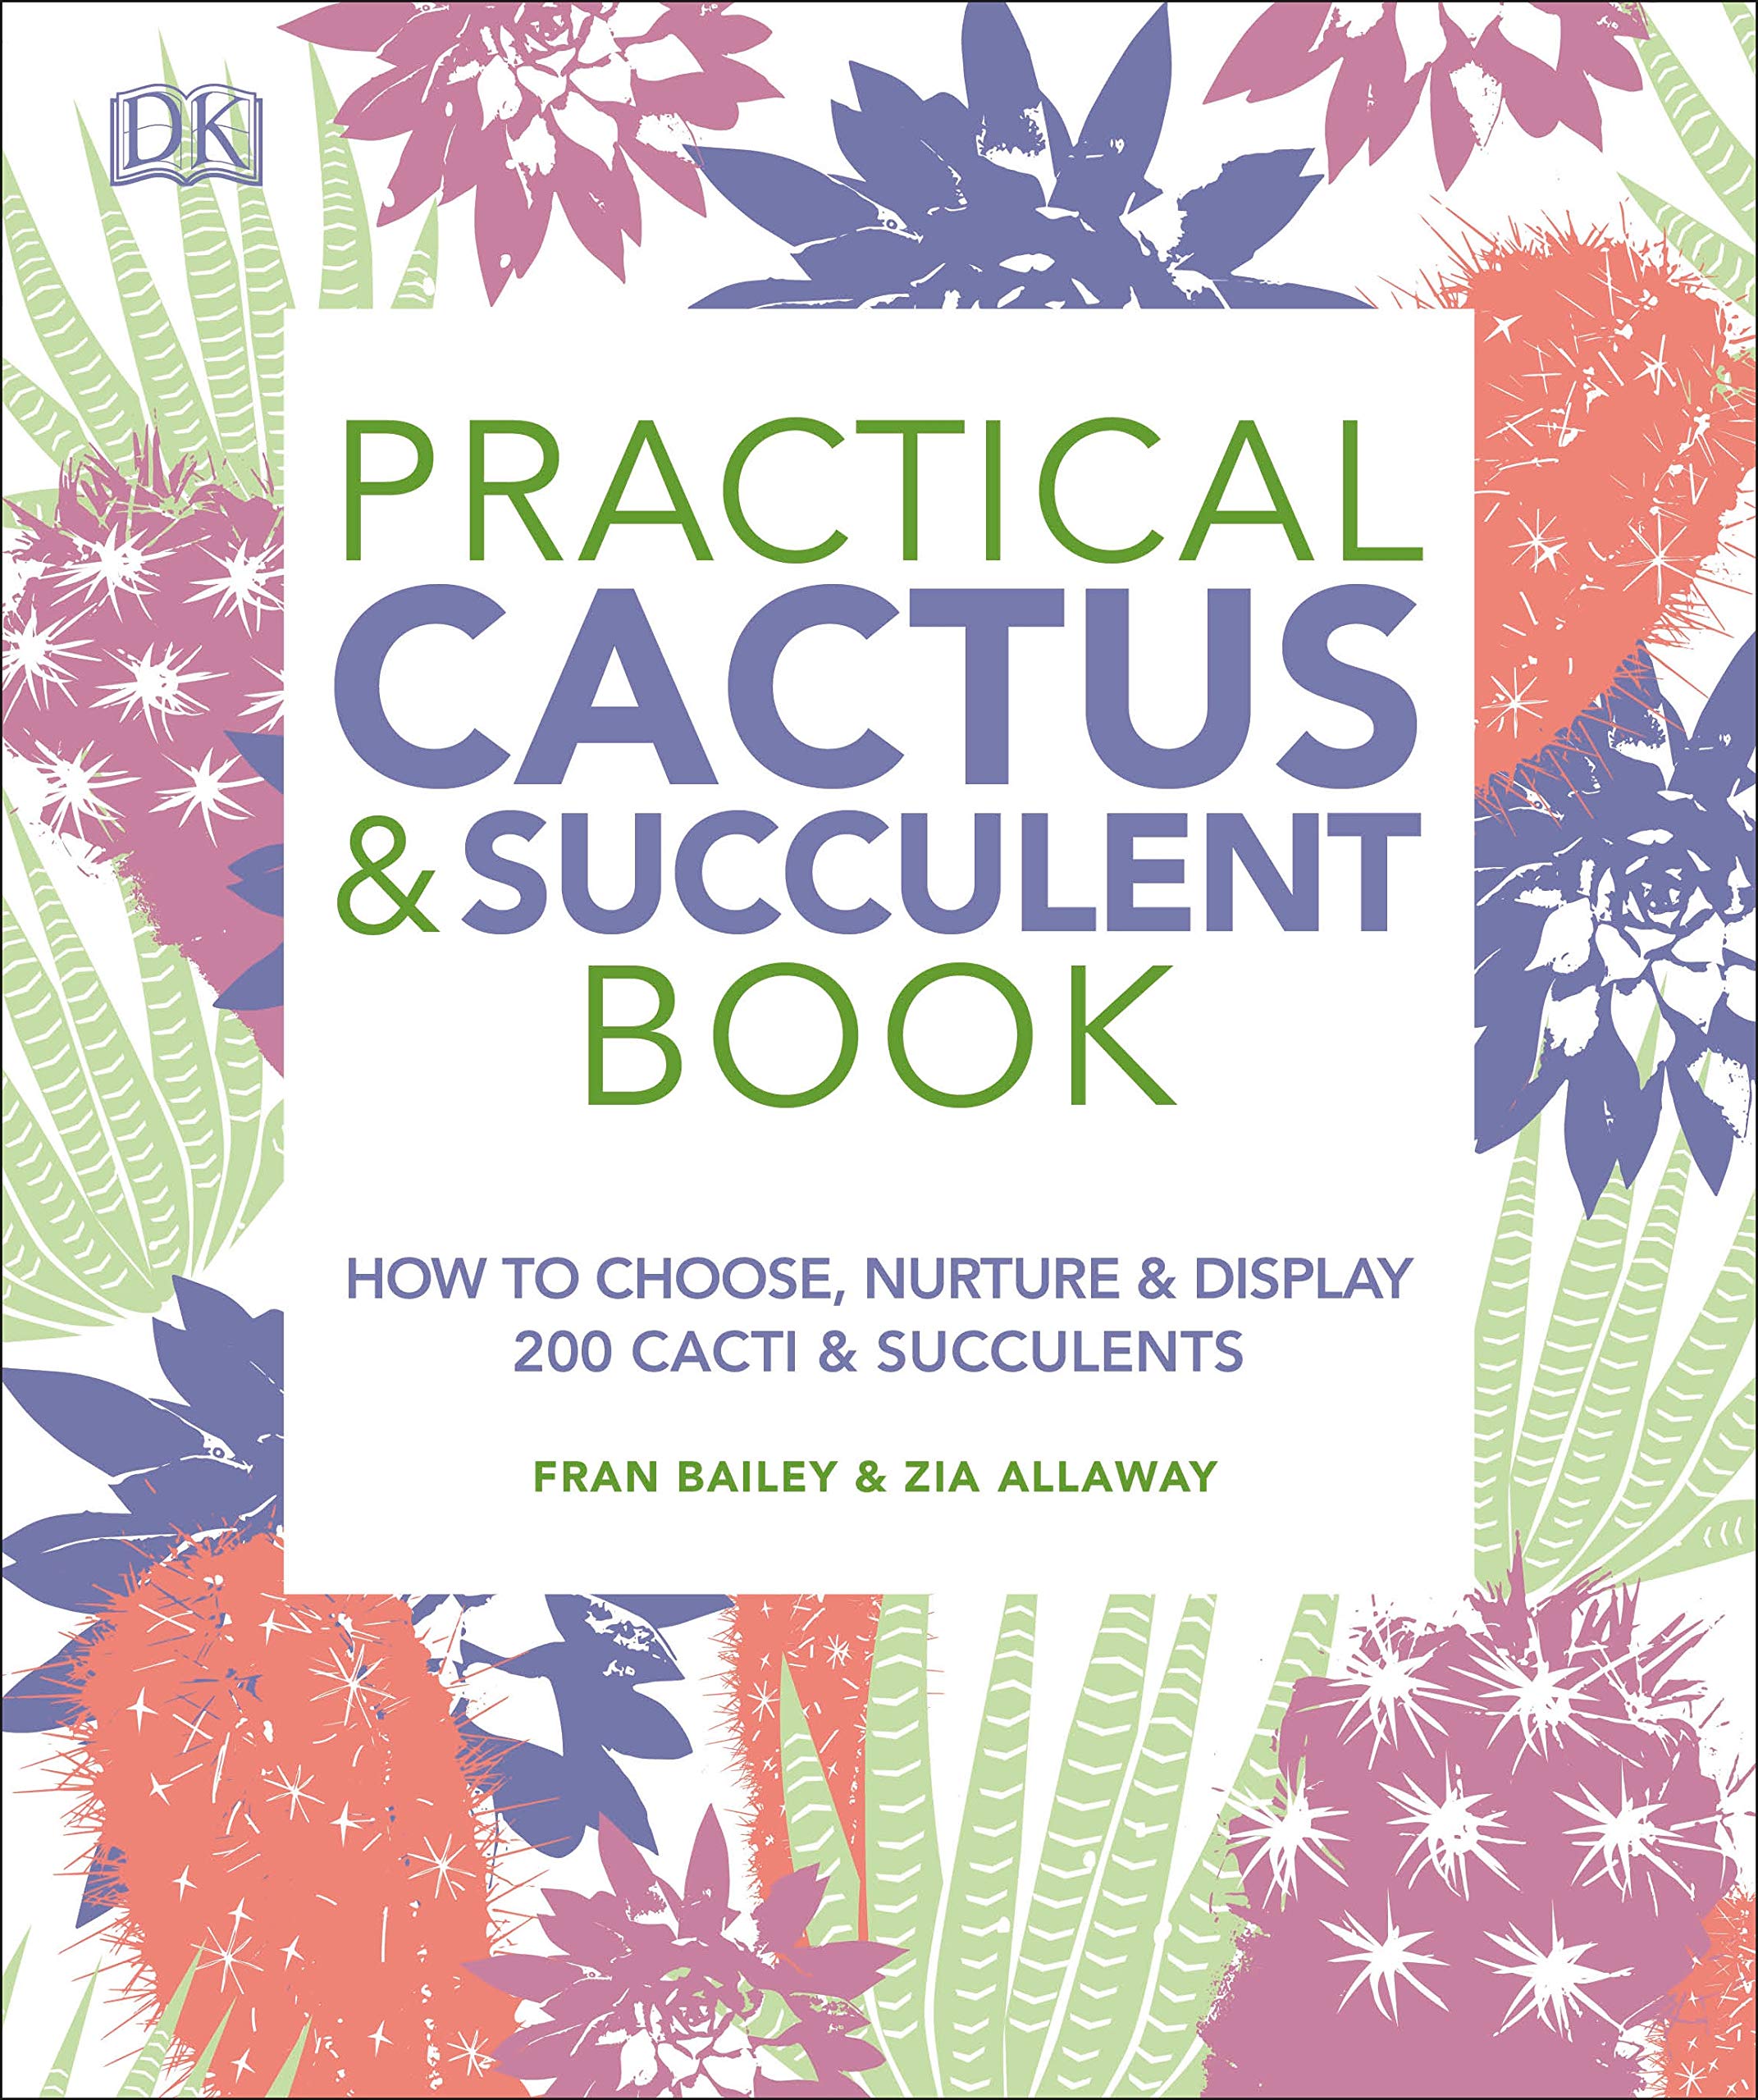 Book cover, Practical Cactus and Succulent Book by Fran Bailey and Zia Allaway.